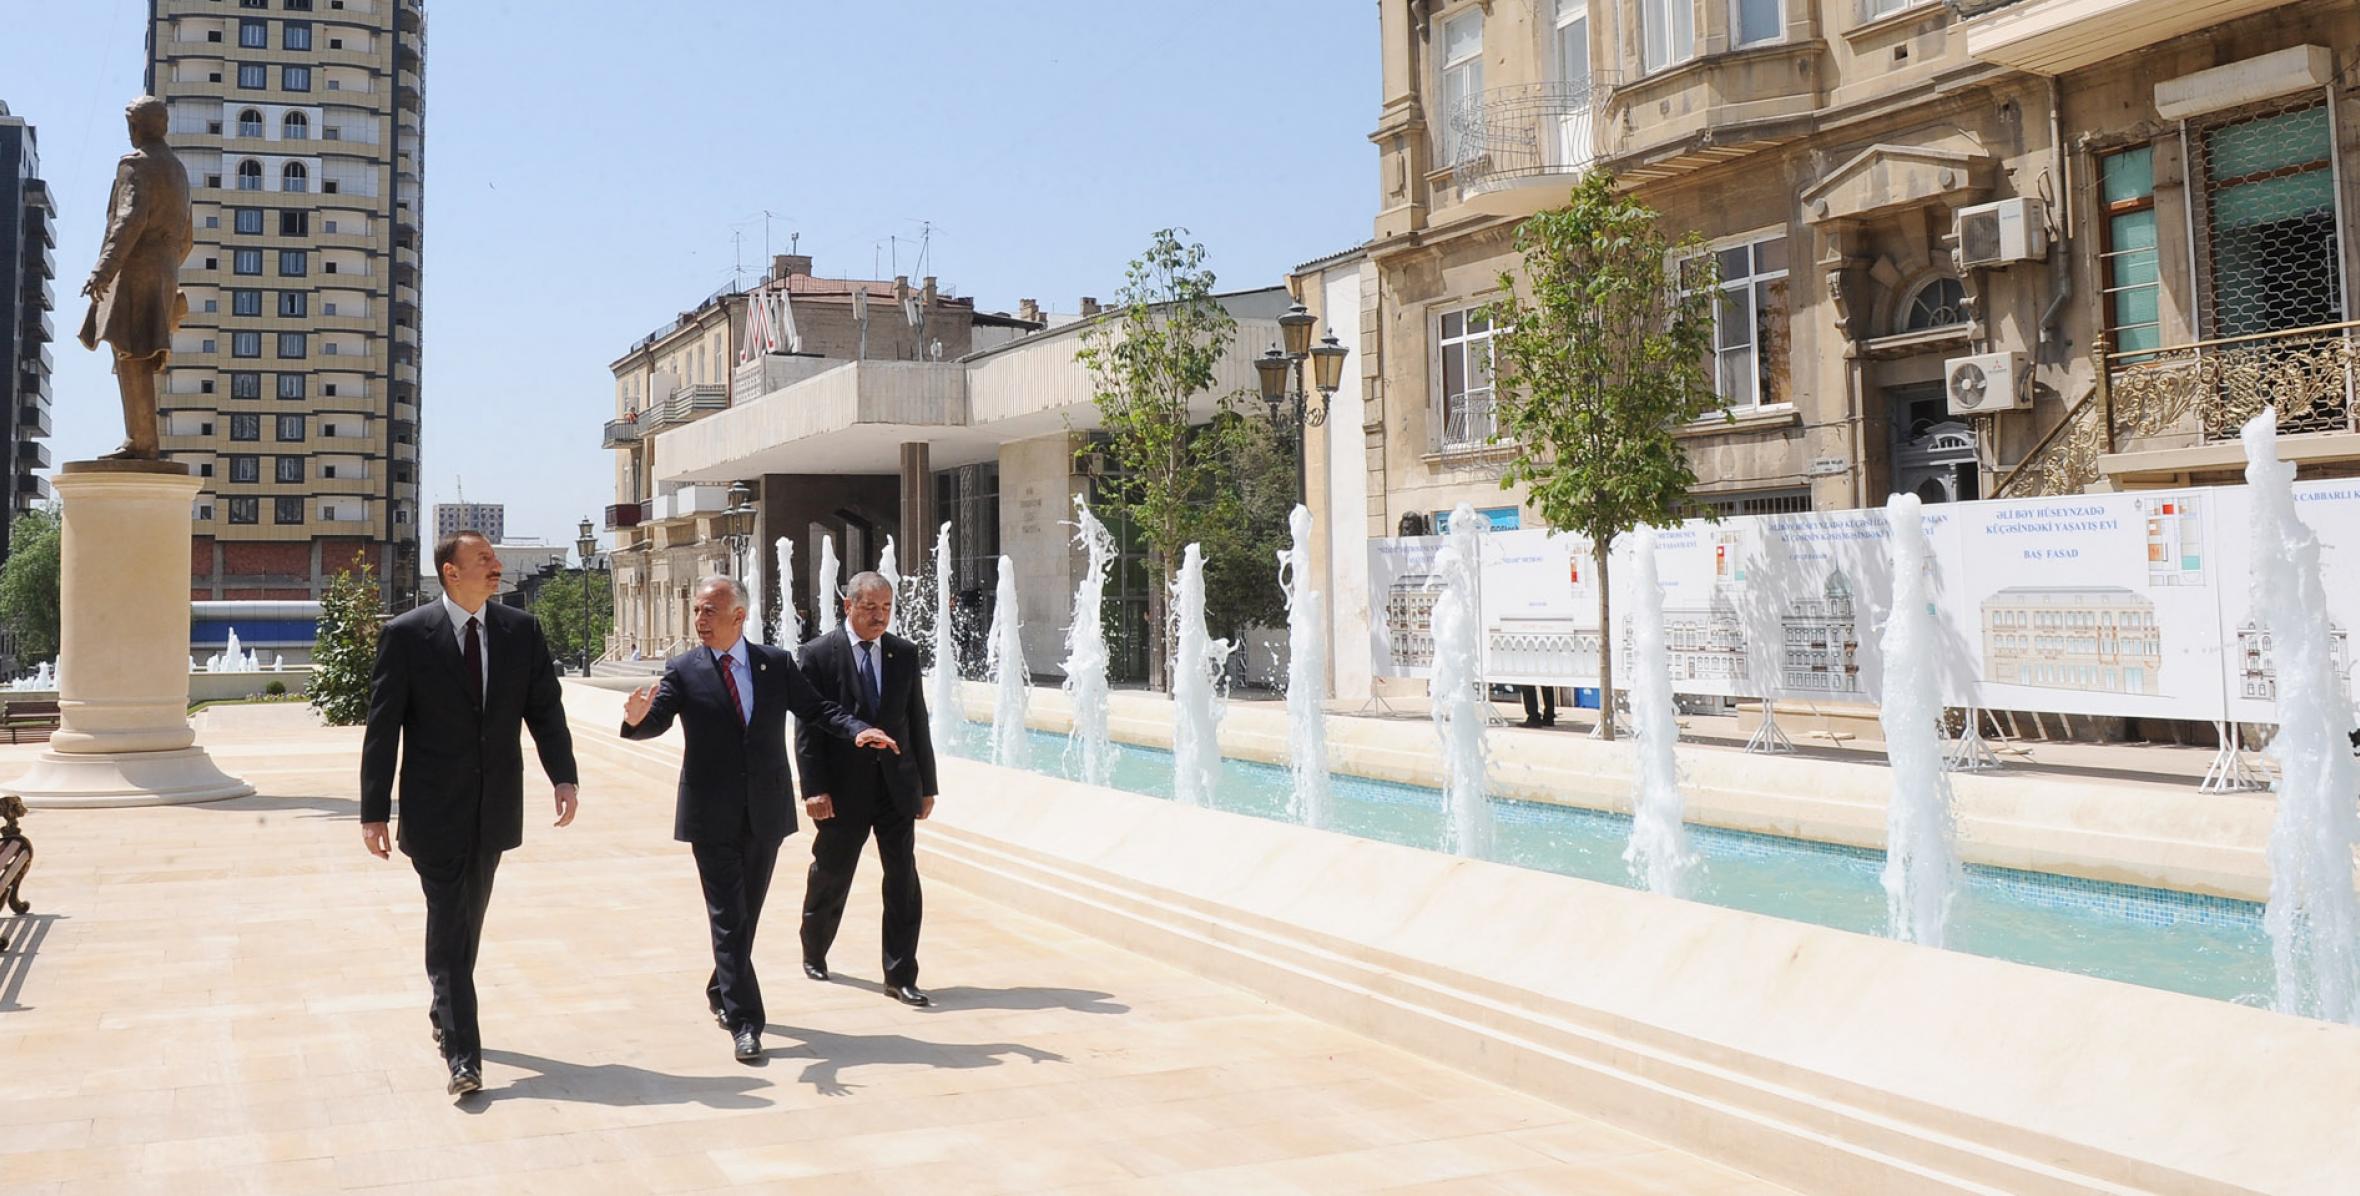 Ilham Aliyev participated at the opening of the Park of Ziver bey Ahmedbeyov